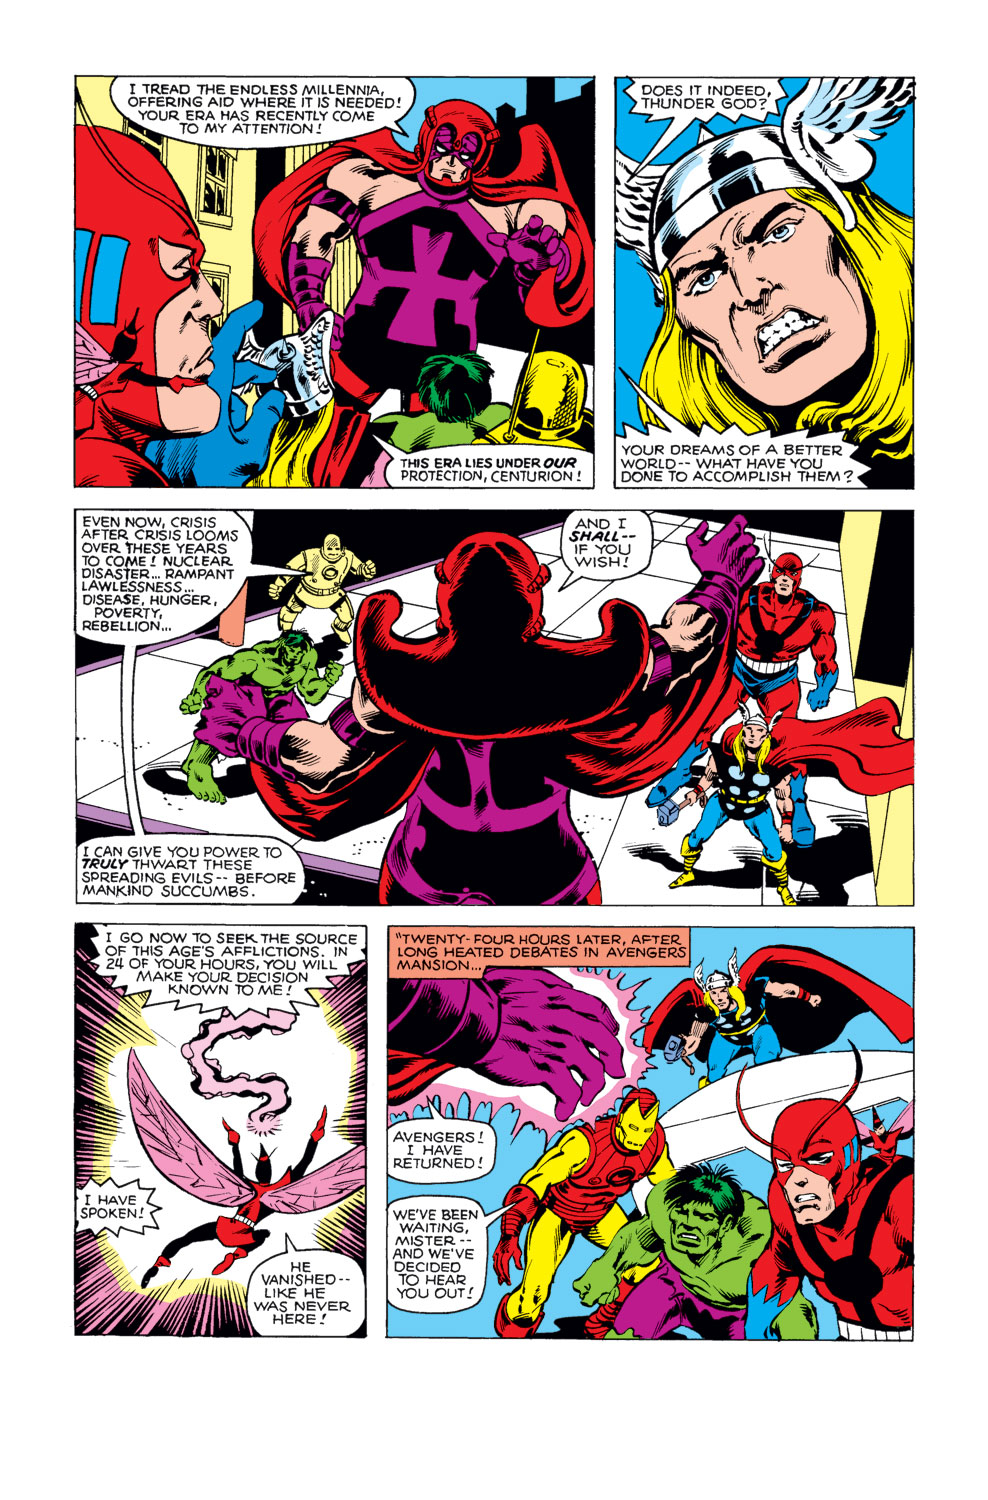 What If? (1977) issue 29 - The Avengers defeated everybody - Page 3